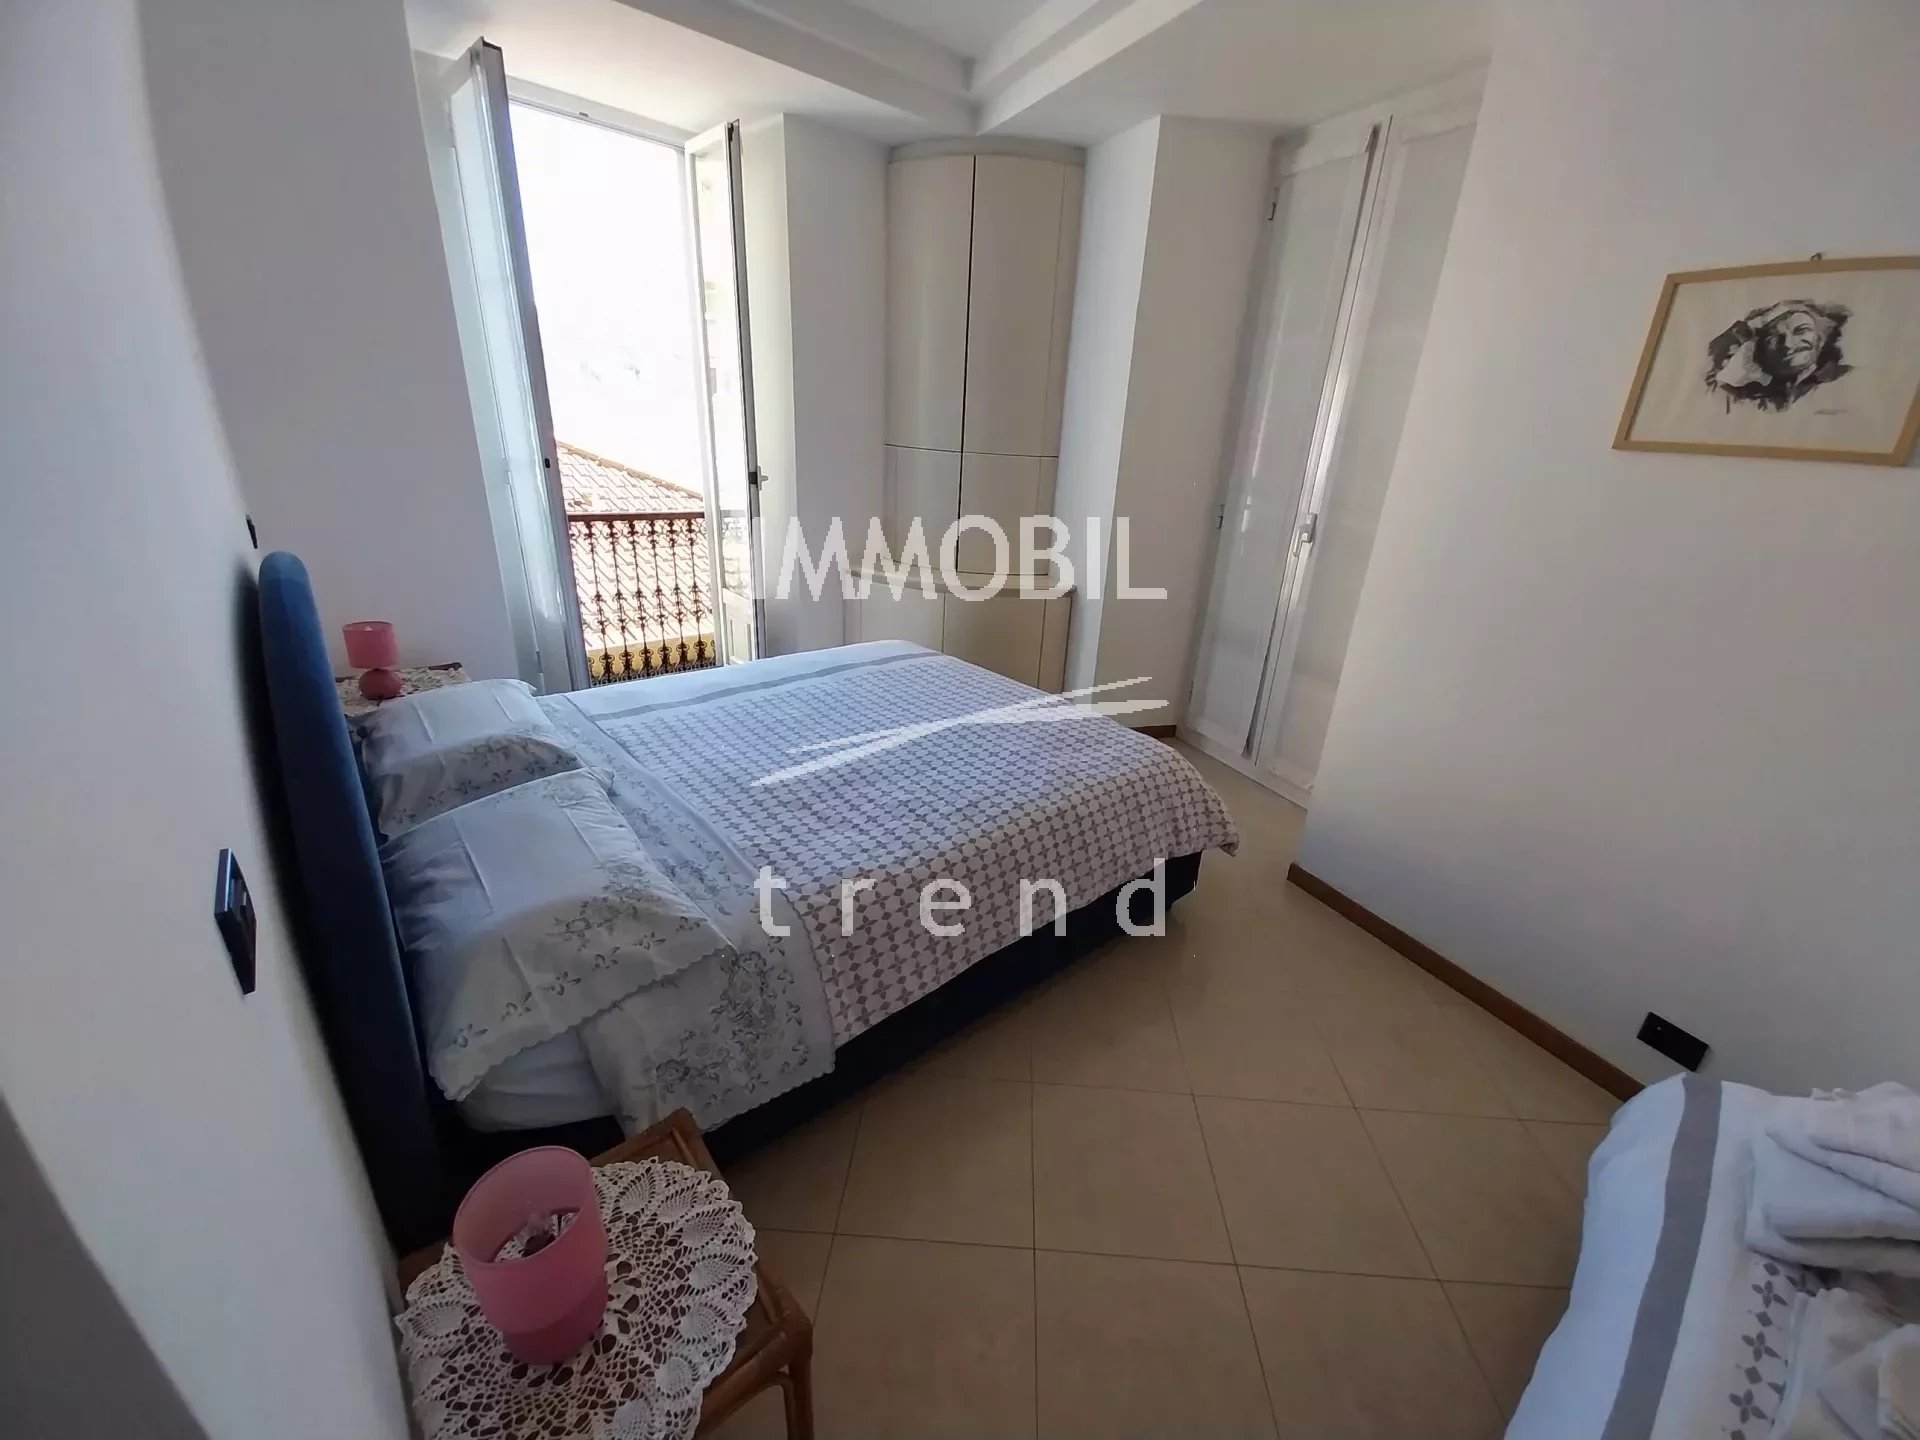 SOLE AGENCY - MENTON OLD TOWN - Charming large two bedroom apartment with panoramic sea view